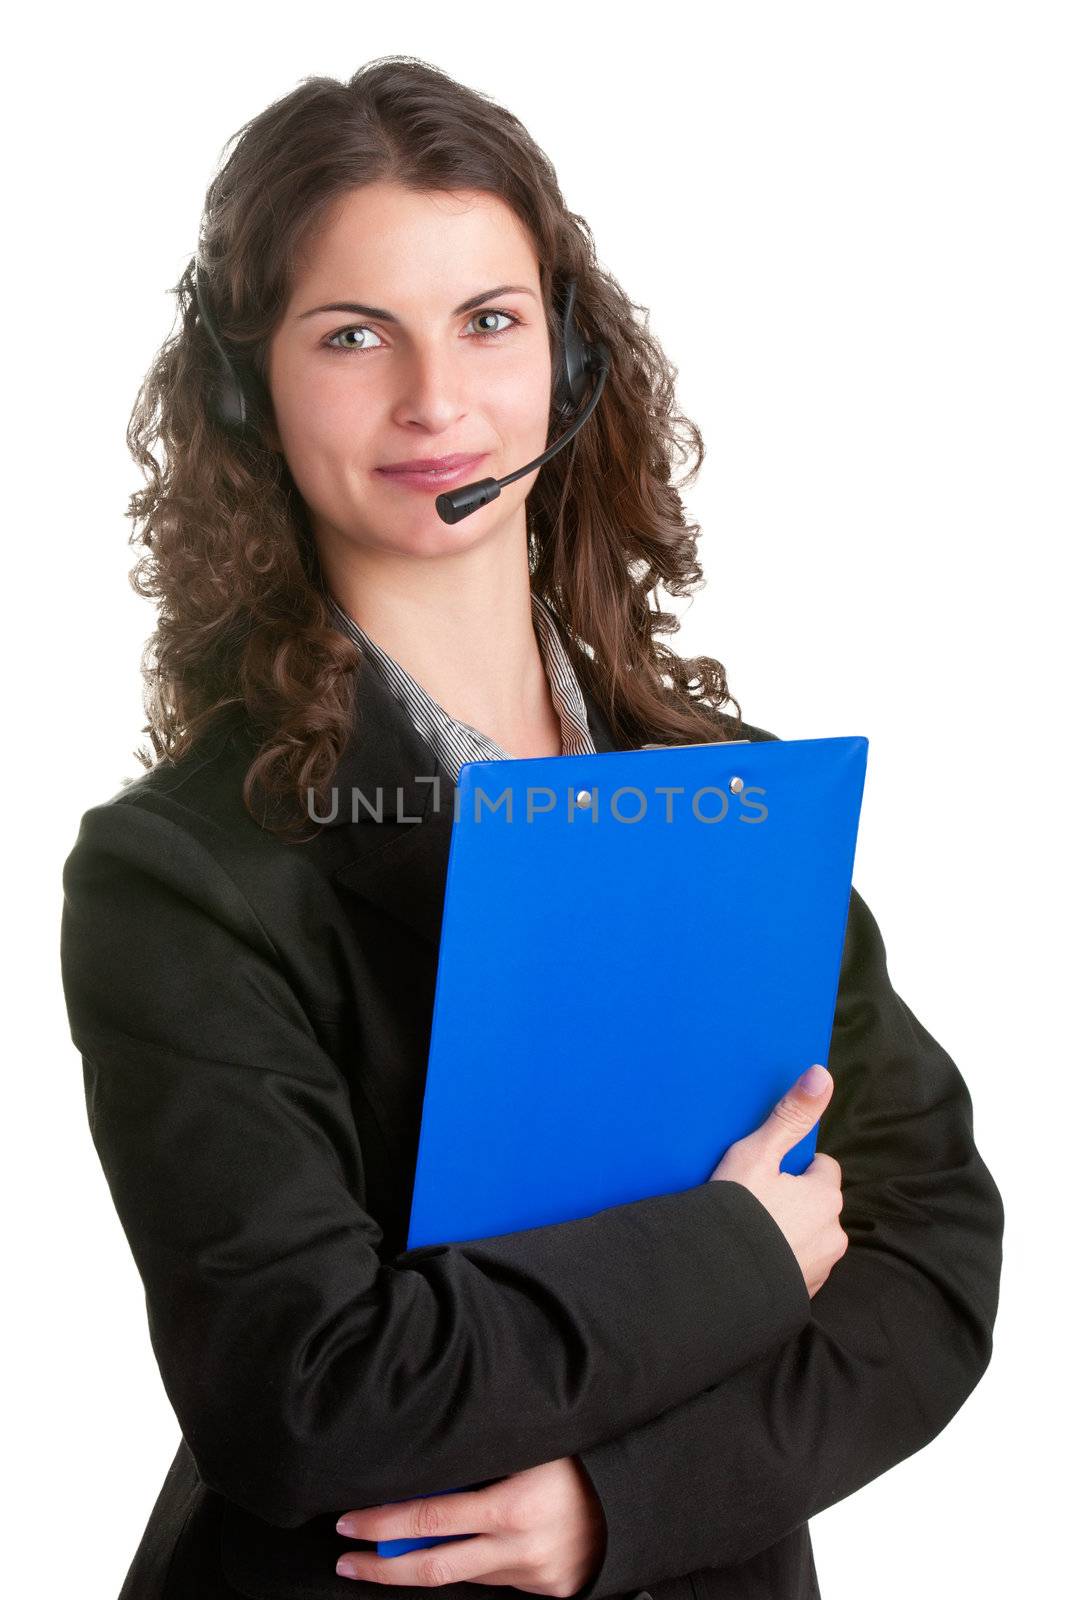 Corporate woman talking over her headset, isolated in a white background